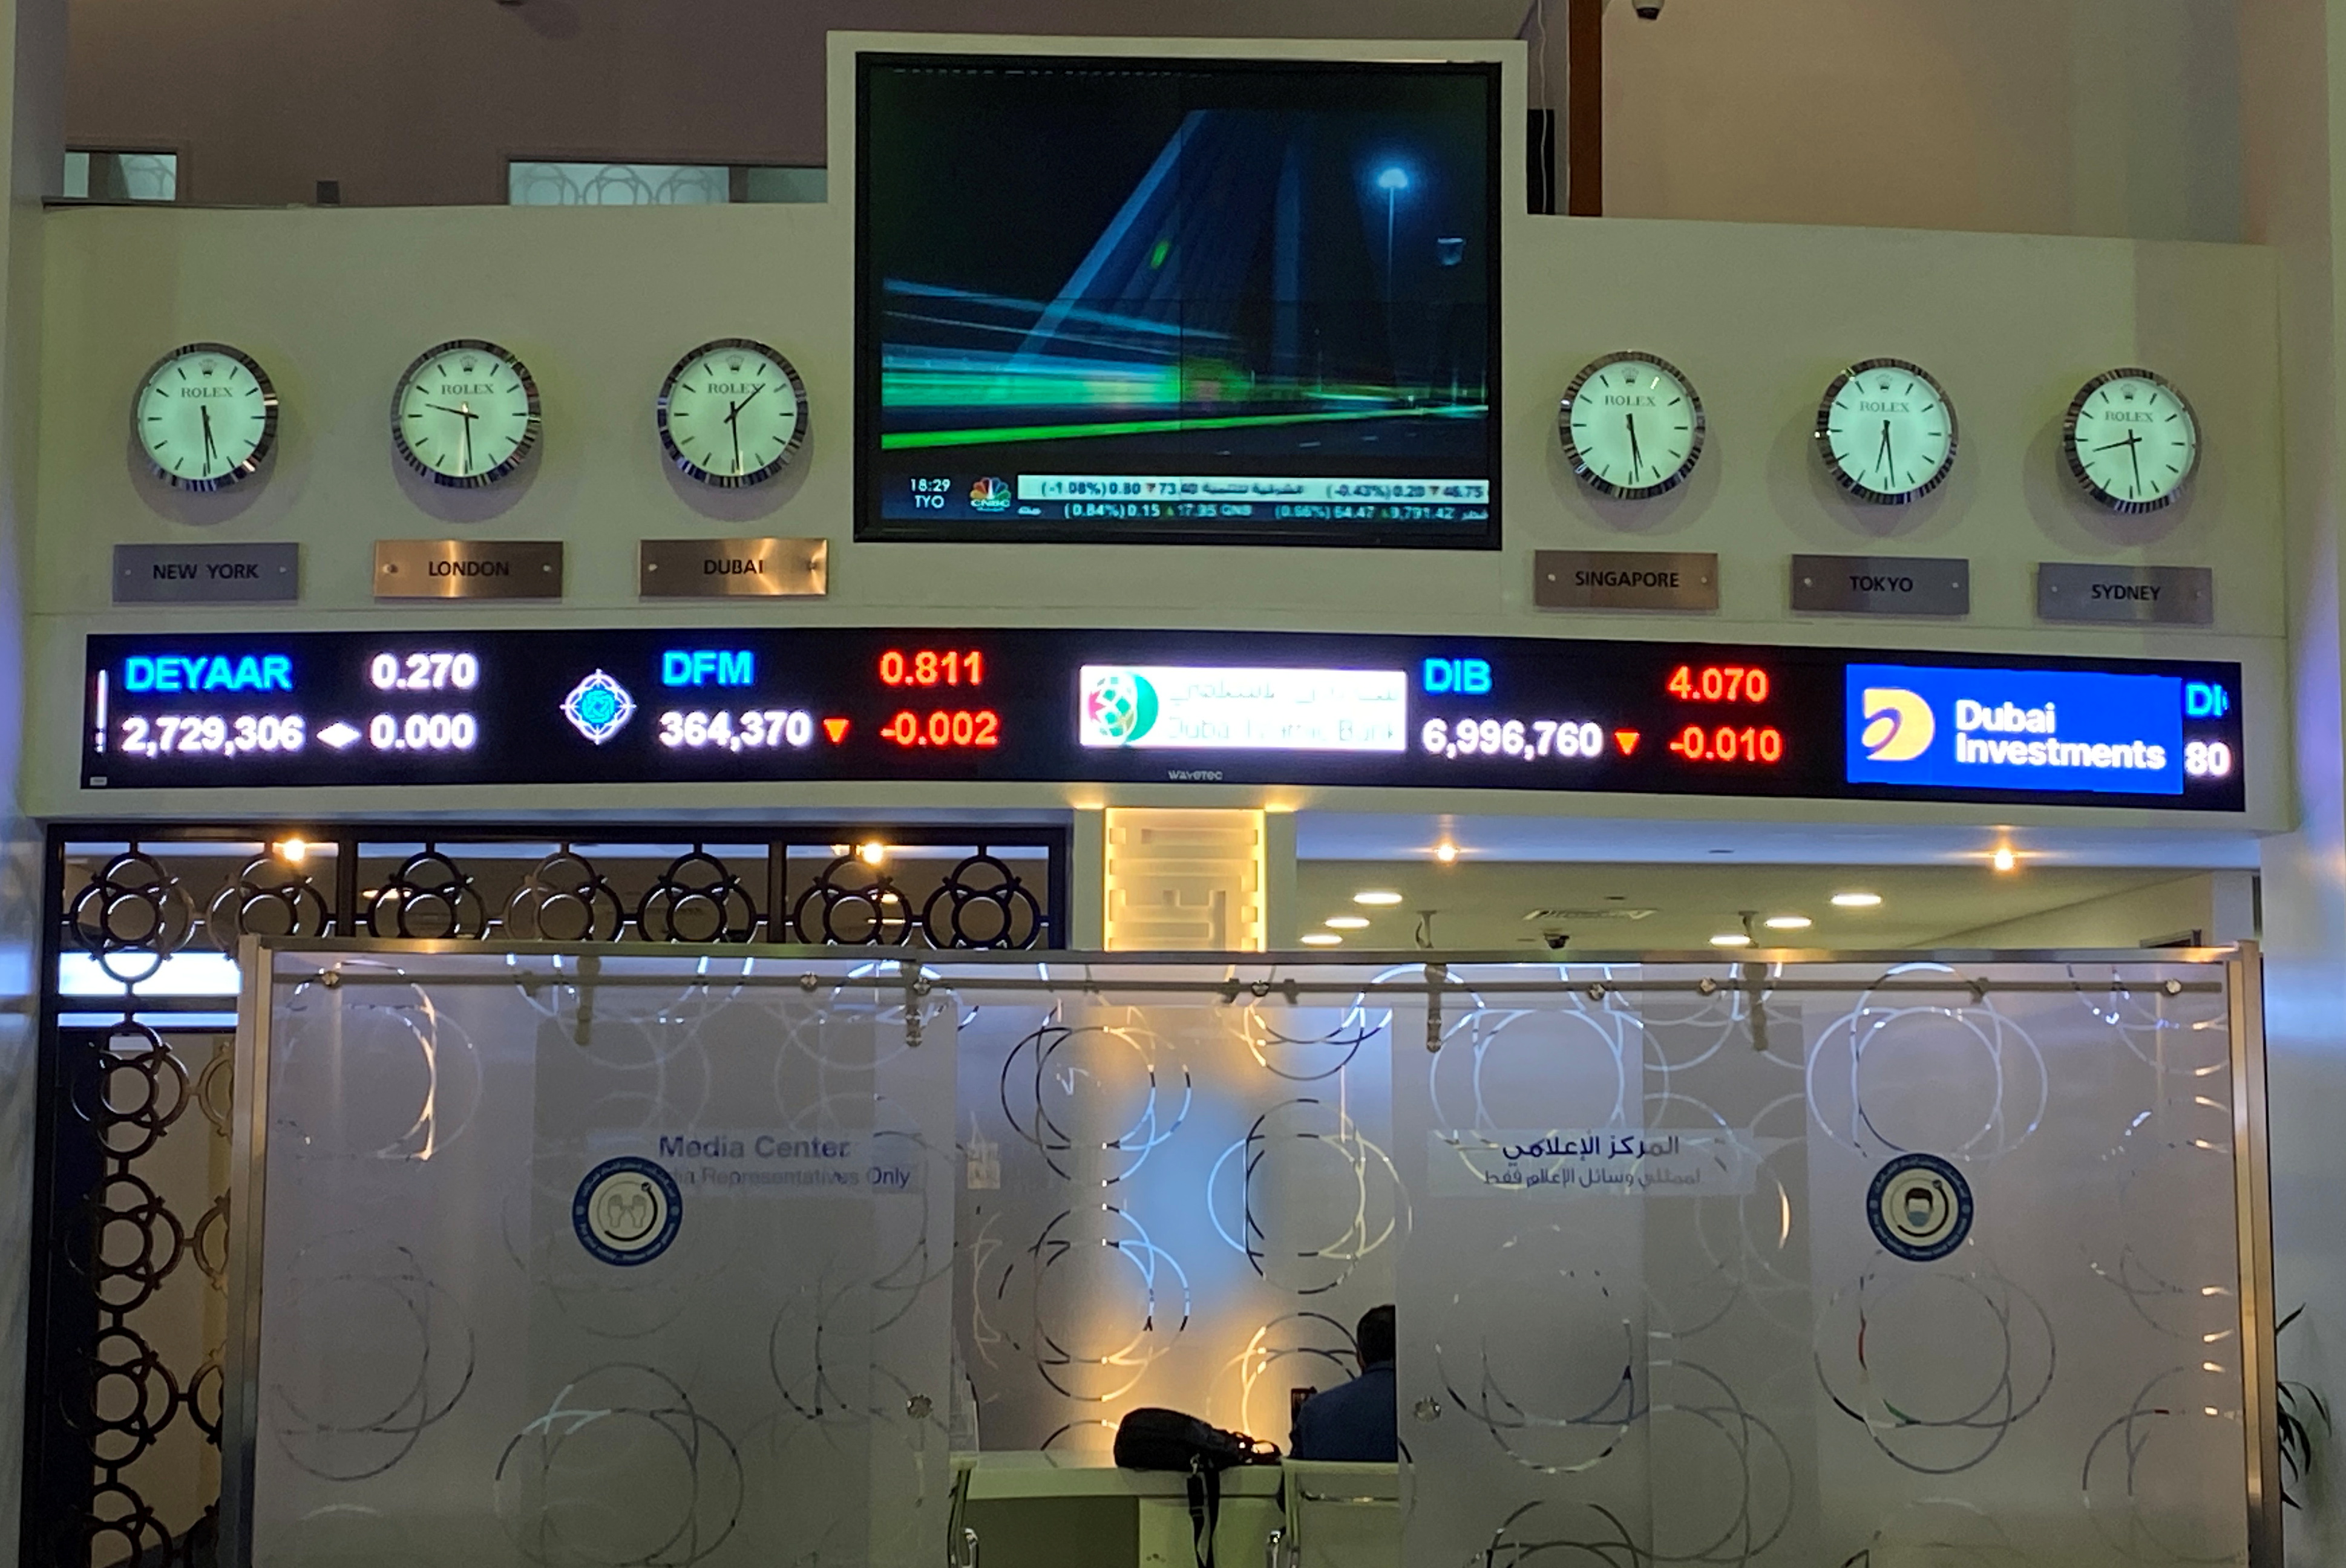 Clocks showing the time in different cities of the world are seen at the stock market